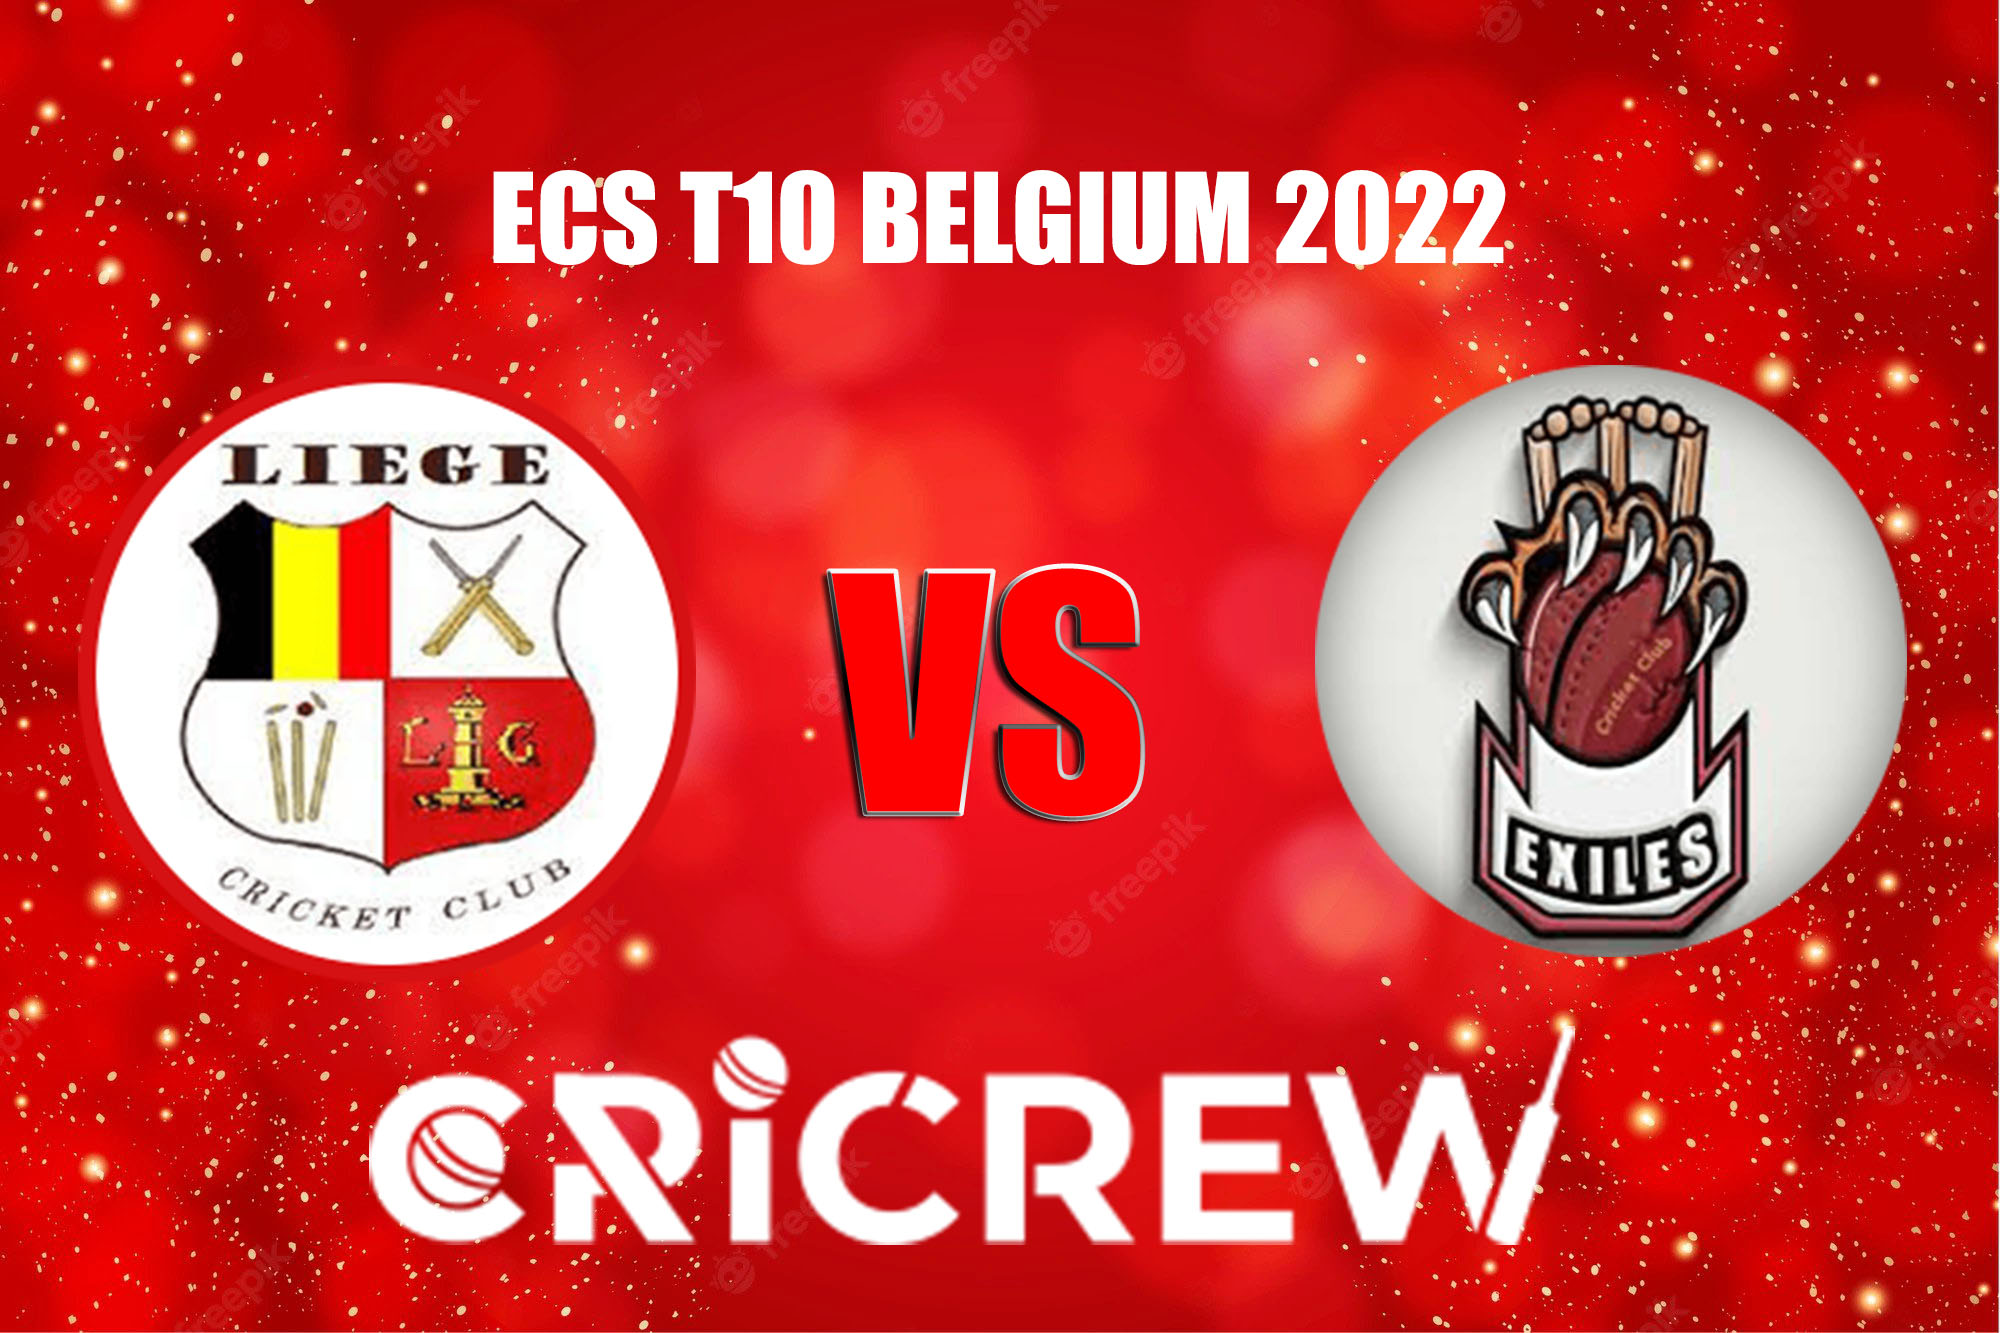 LIE vs OEX Live Score starts on 09 Sep, 06:00 PM IST at Vrijbroek Cricket Ground in Mechelen, Belgium. Here on www.cricrew.com you can find all Live, Upcoming..